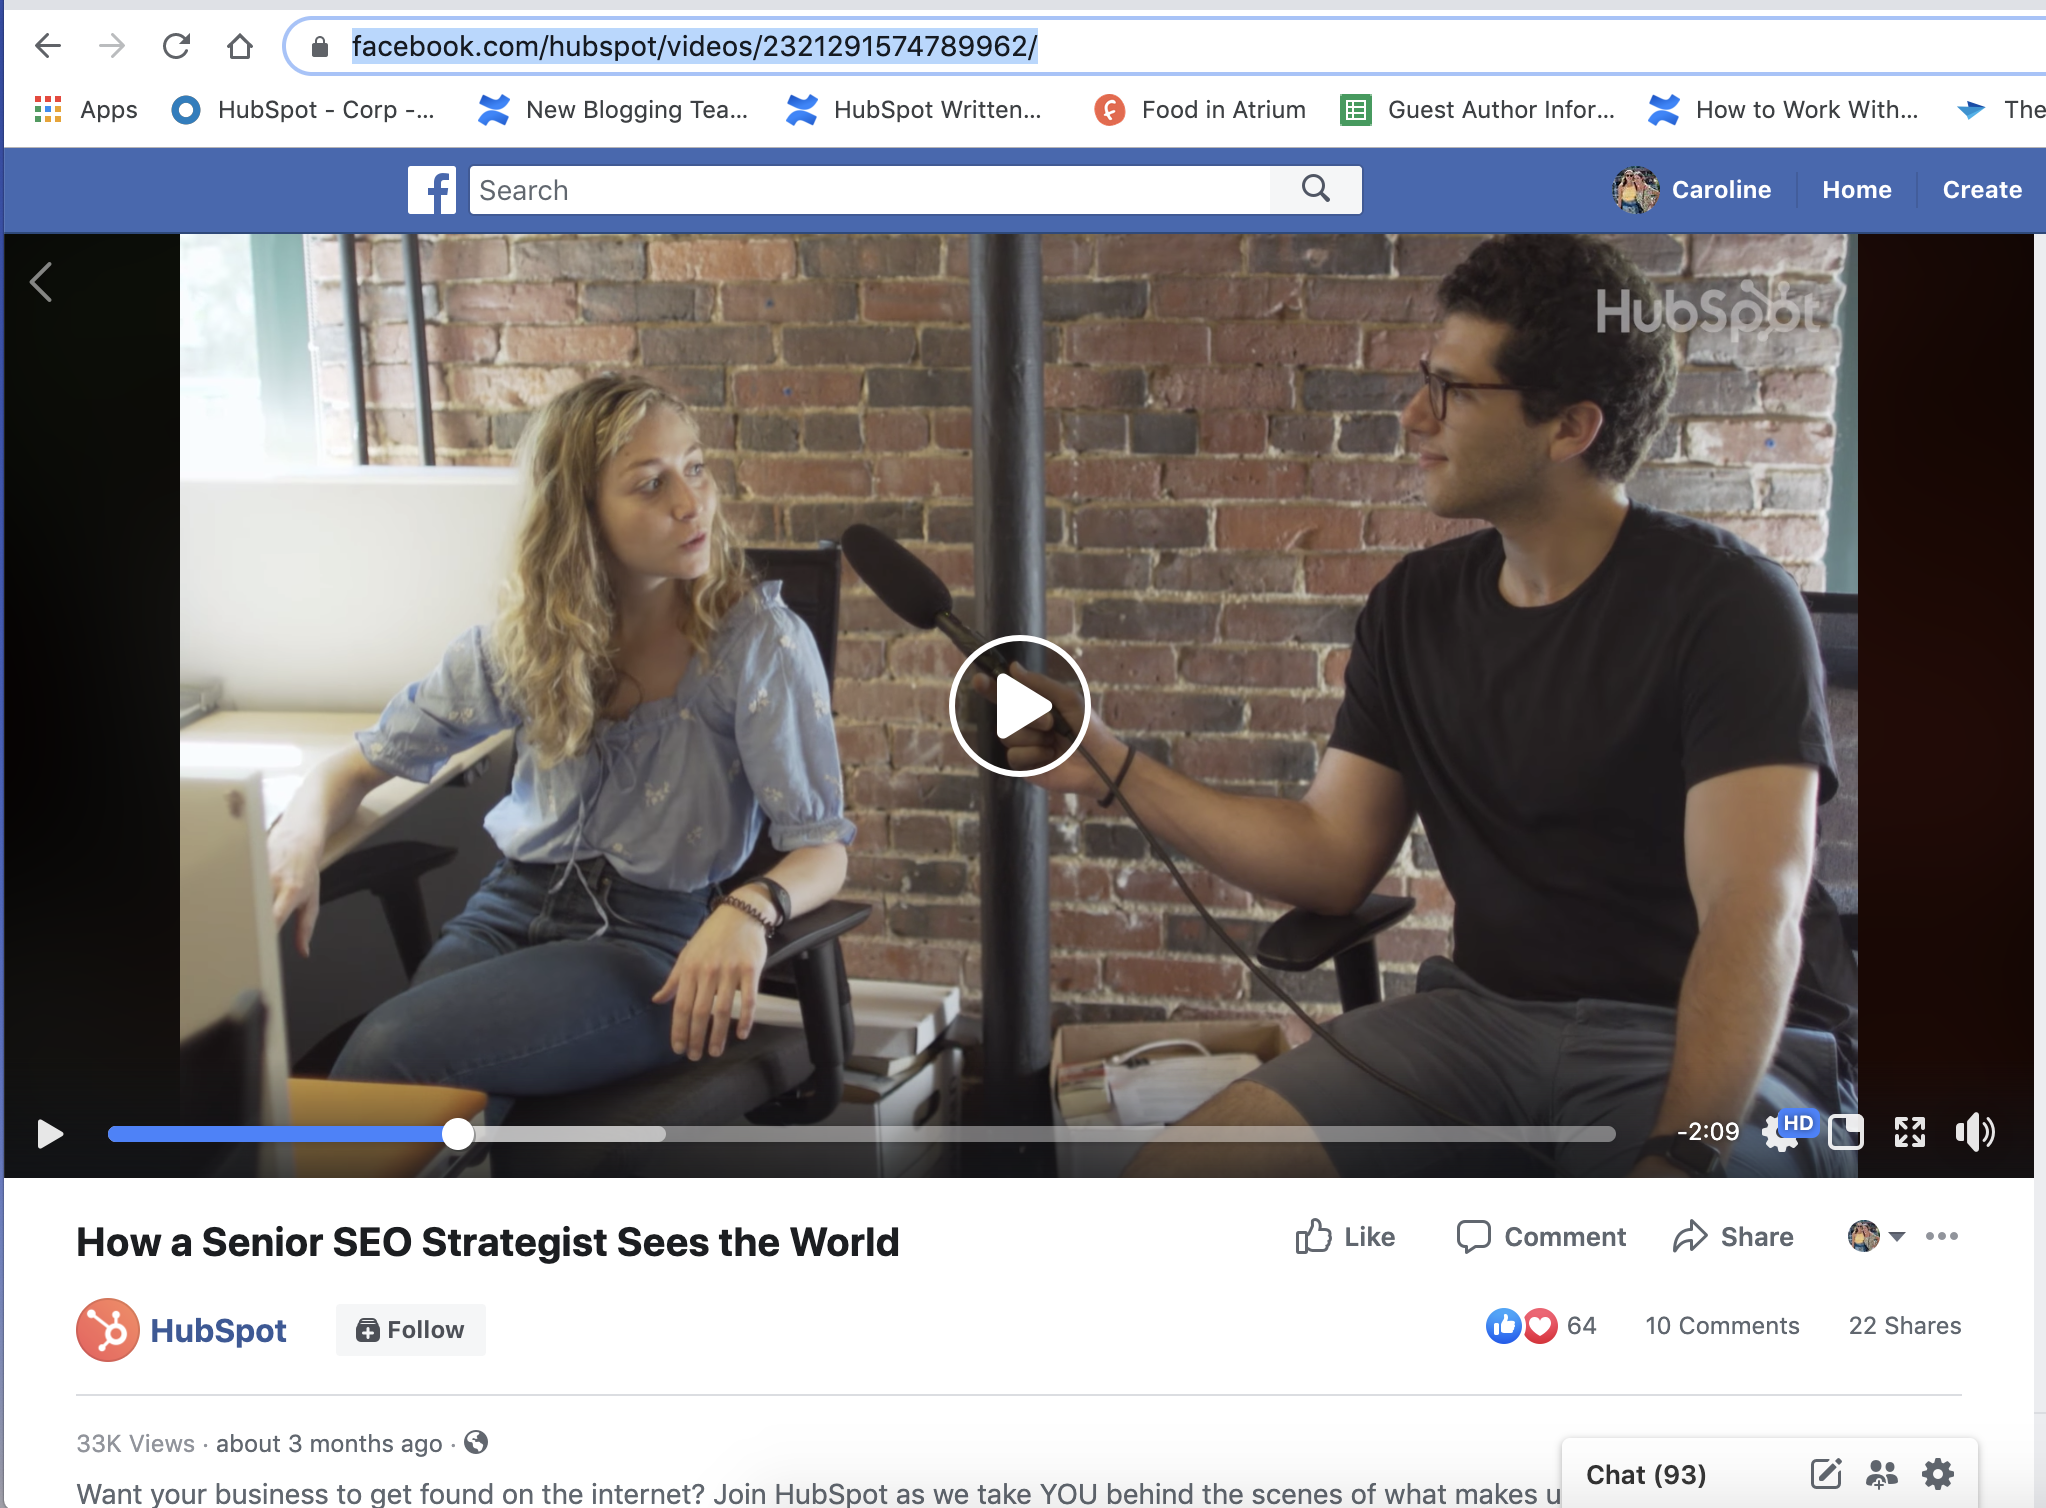 How to embed a video in an email, example Facebook URL.